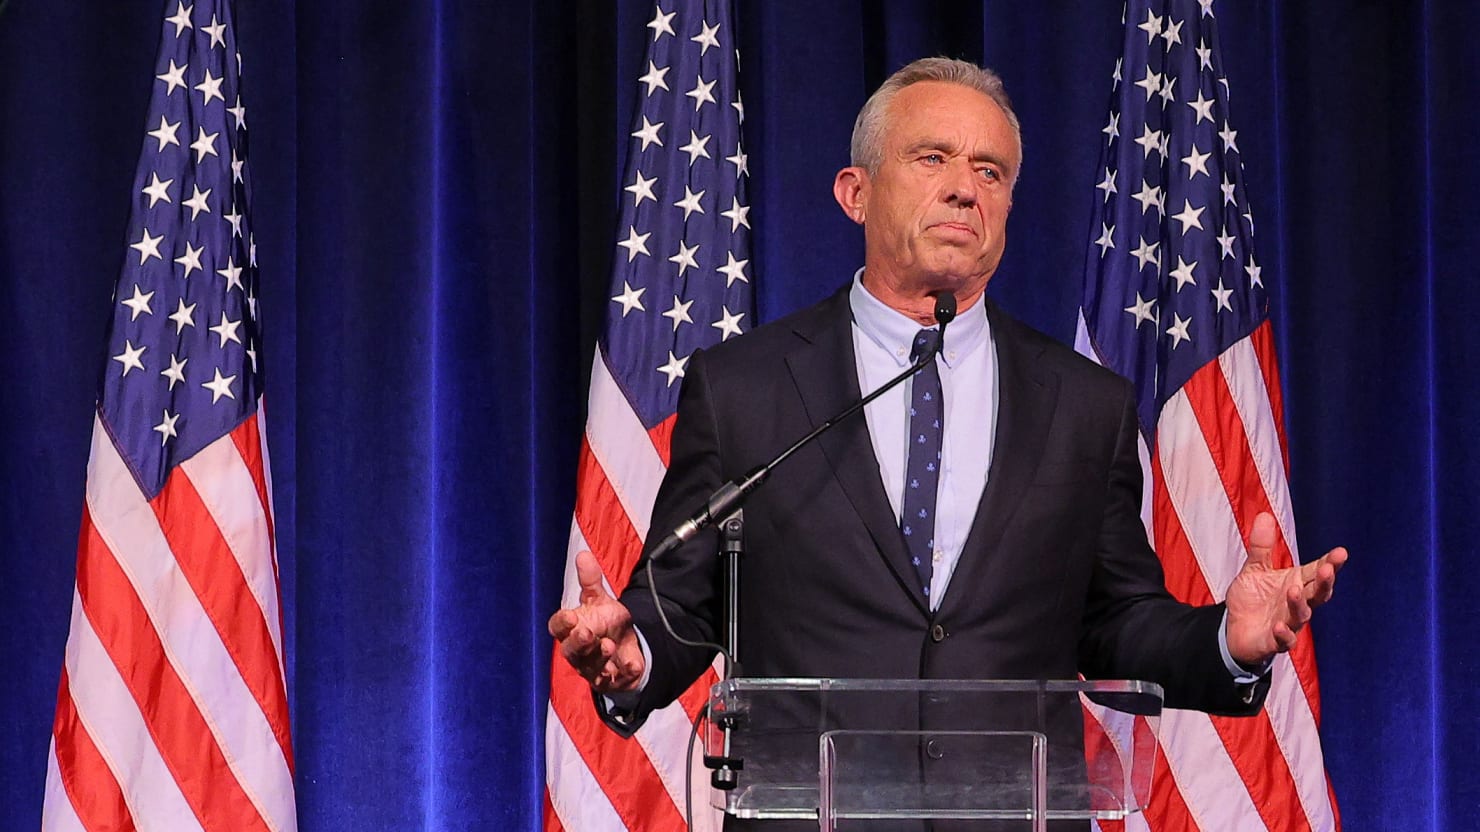 RFK Jr. Rakes in Nearly $8 Million in Income From Legal, Consulting Work